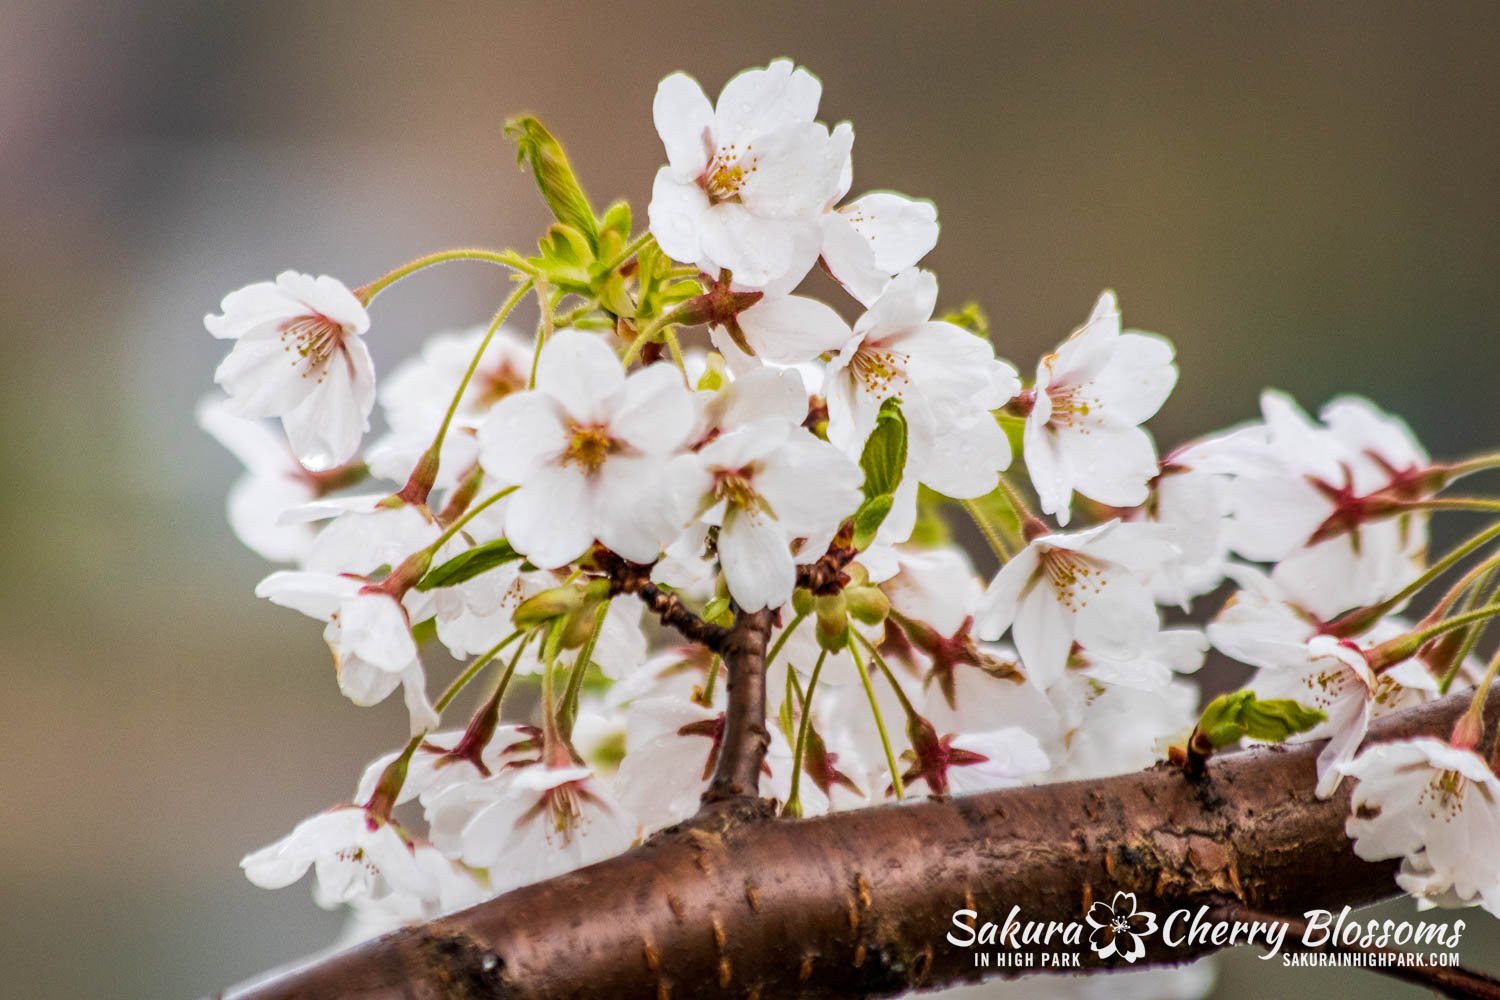 Sakura Watch April 27, 2024 - The last days of Peak Bloom are here, as petals begin to fall in High Park. During my visit on this rainy morning, I could see the beginning of petals falling in a few areas of the park, but overall, the trees still have